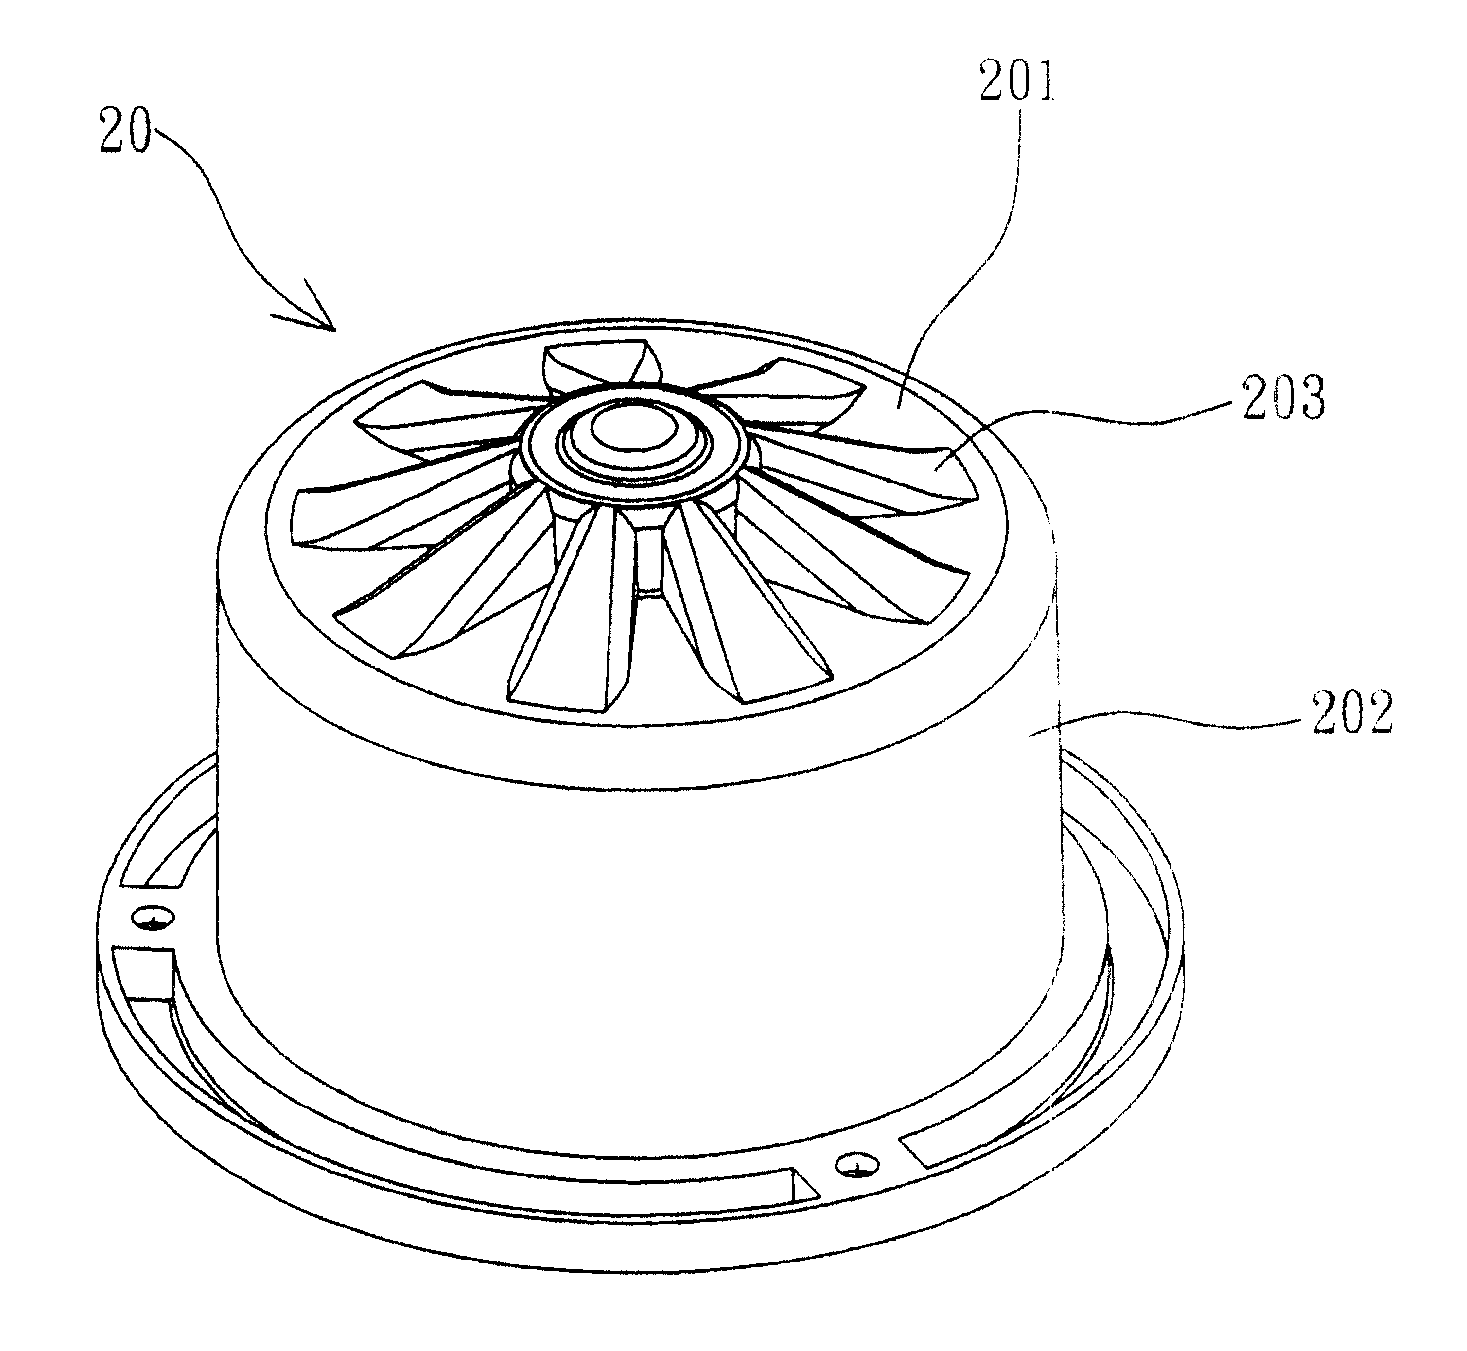 Fan, motor and its shell